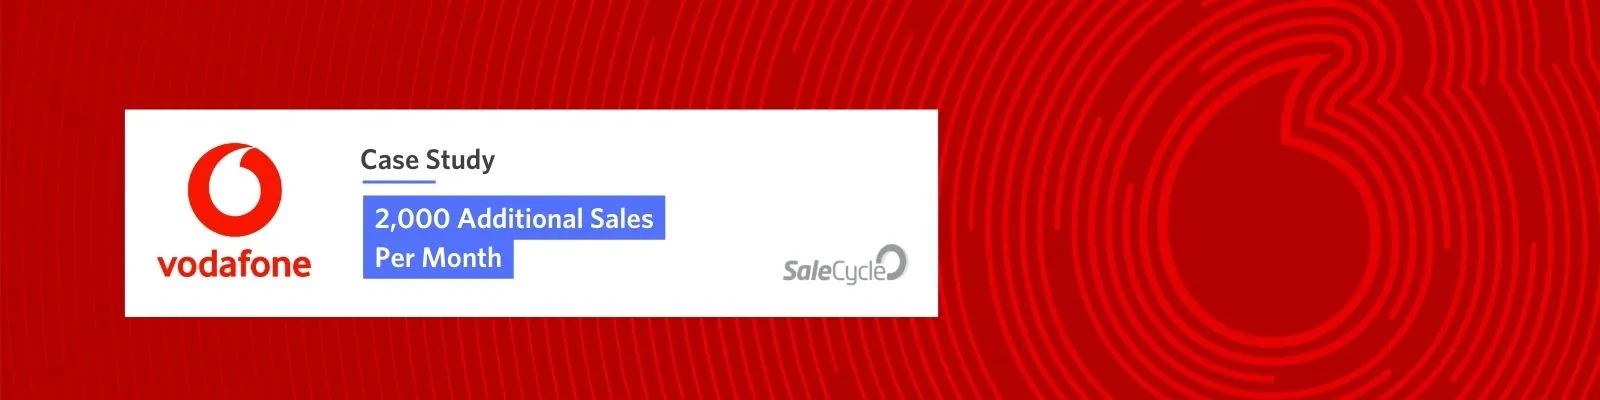 How SaleCycle helped Vodafone increase their online sales by an additional 2,000 additional sales per month [Extended Version] 